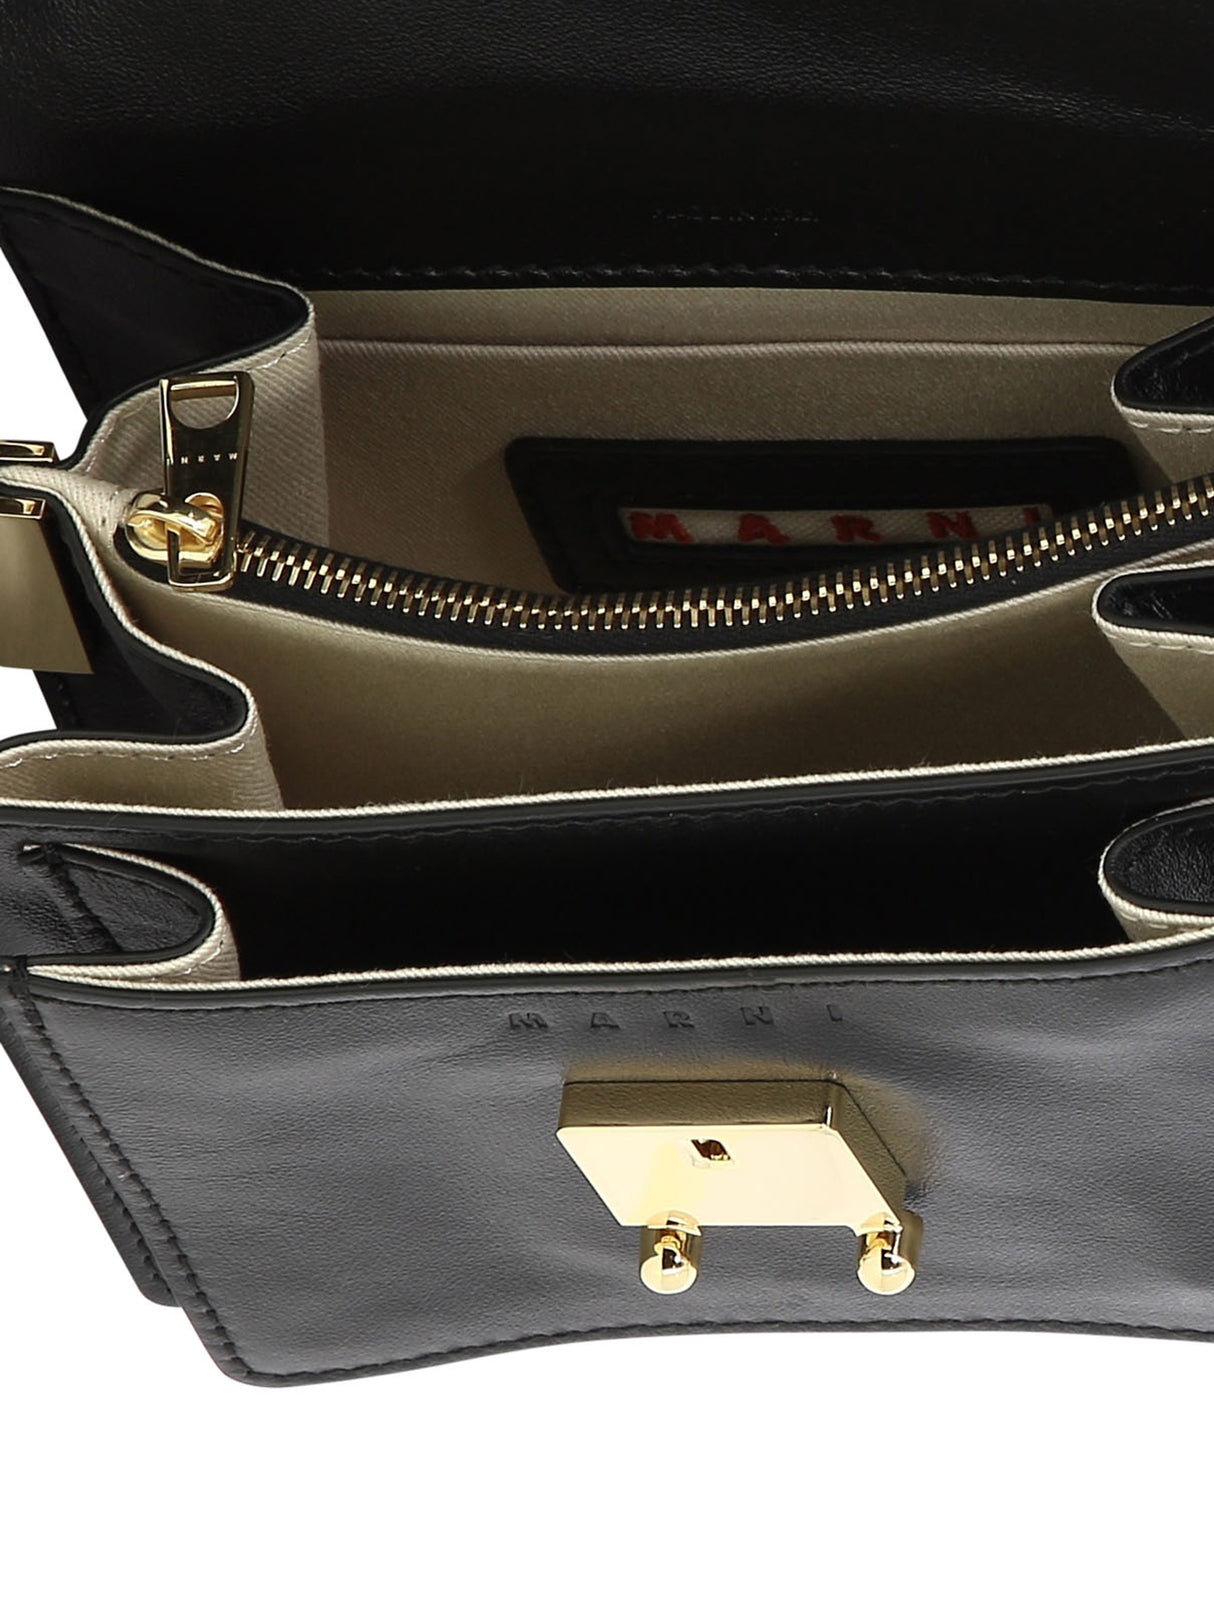 MARNI Mini Trunk Soft Black Leather Shoulder Bag with Adjustable Strap and Clasp Closure